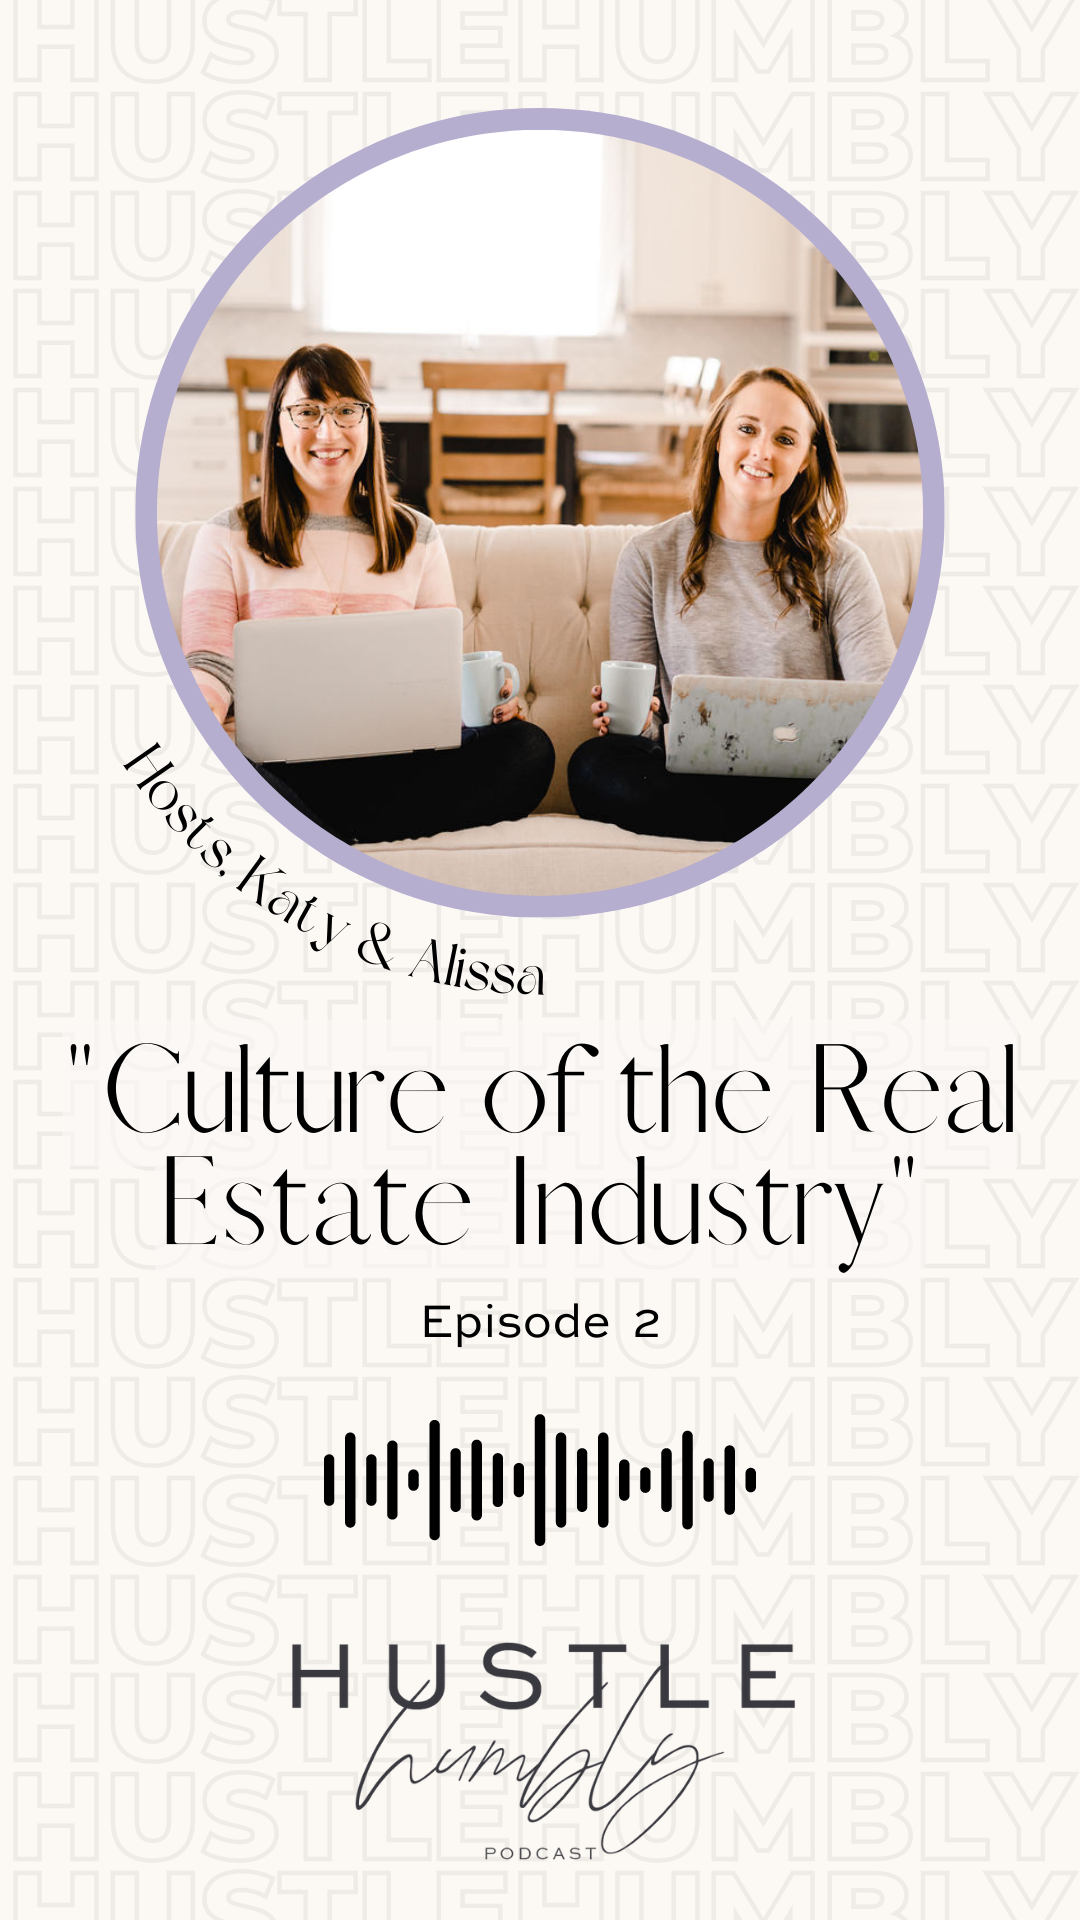 Realtor sign with "Culture of the Real Estate Industry" text overlay.